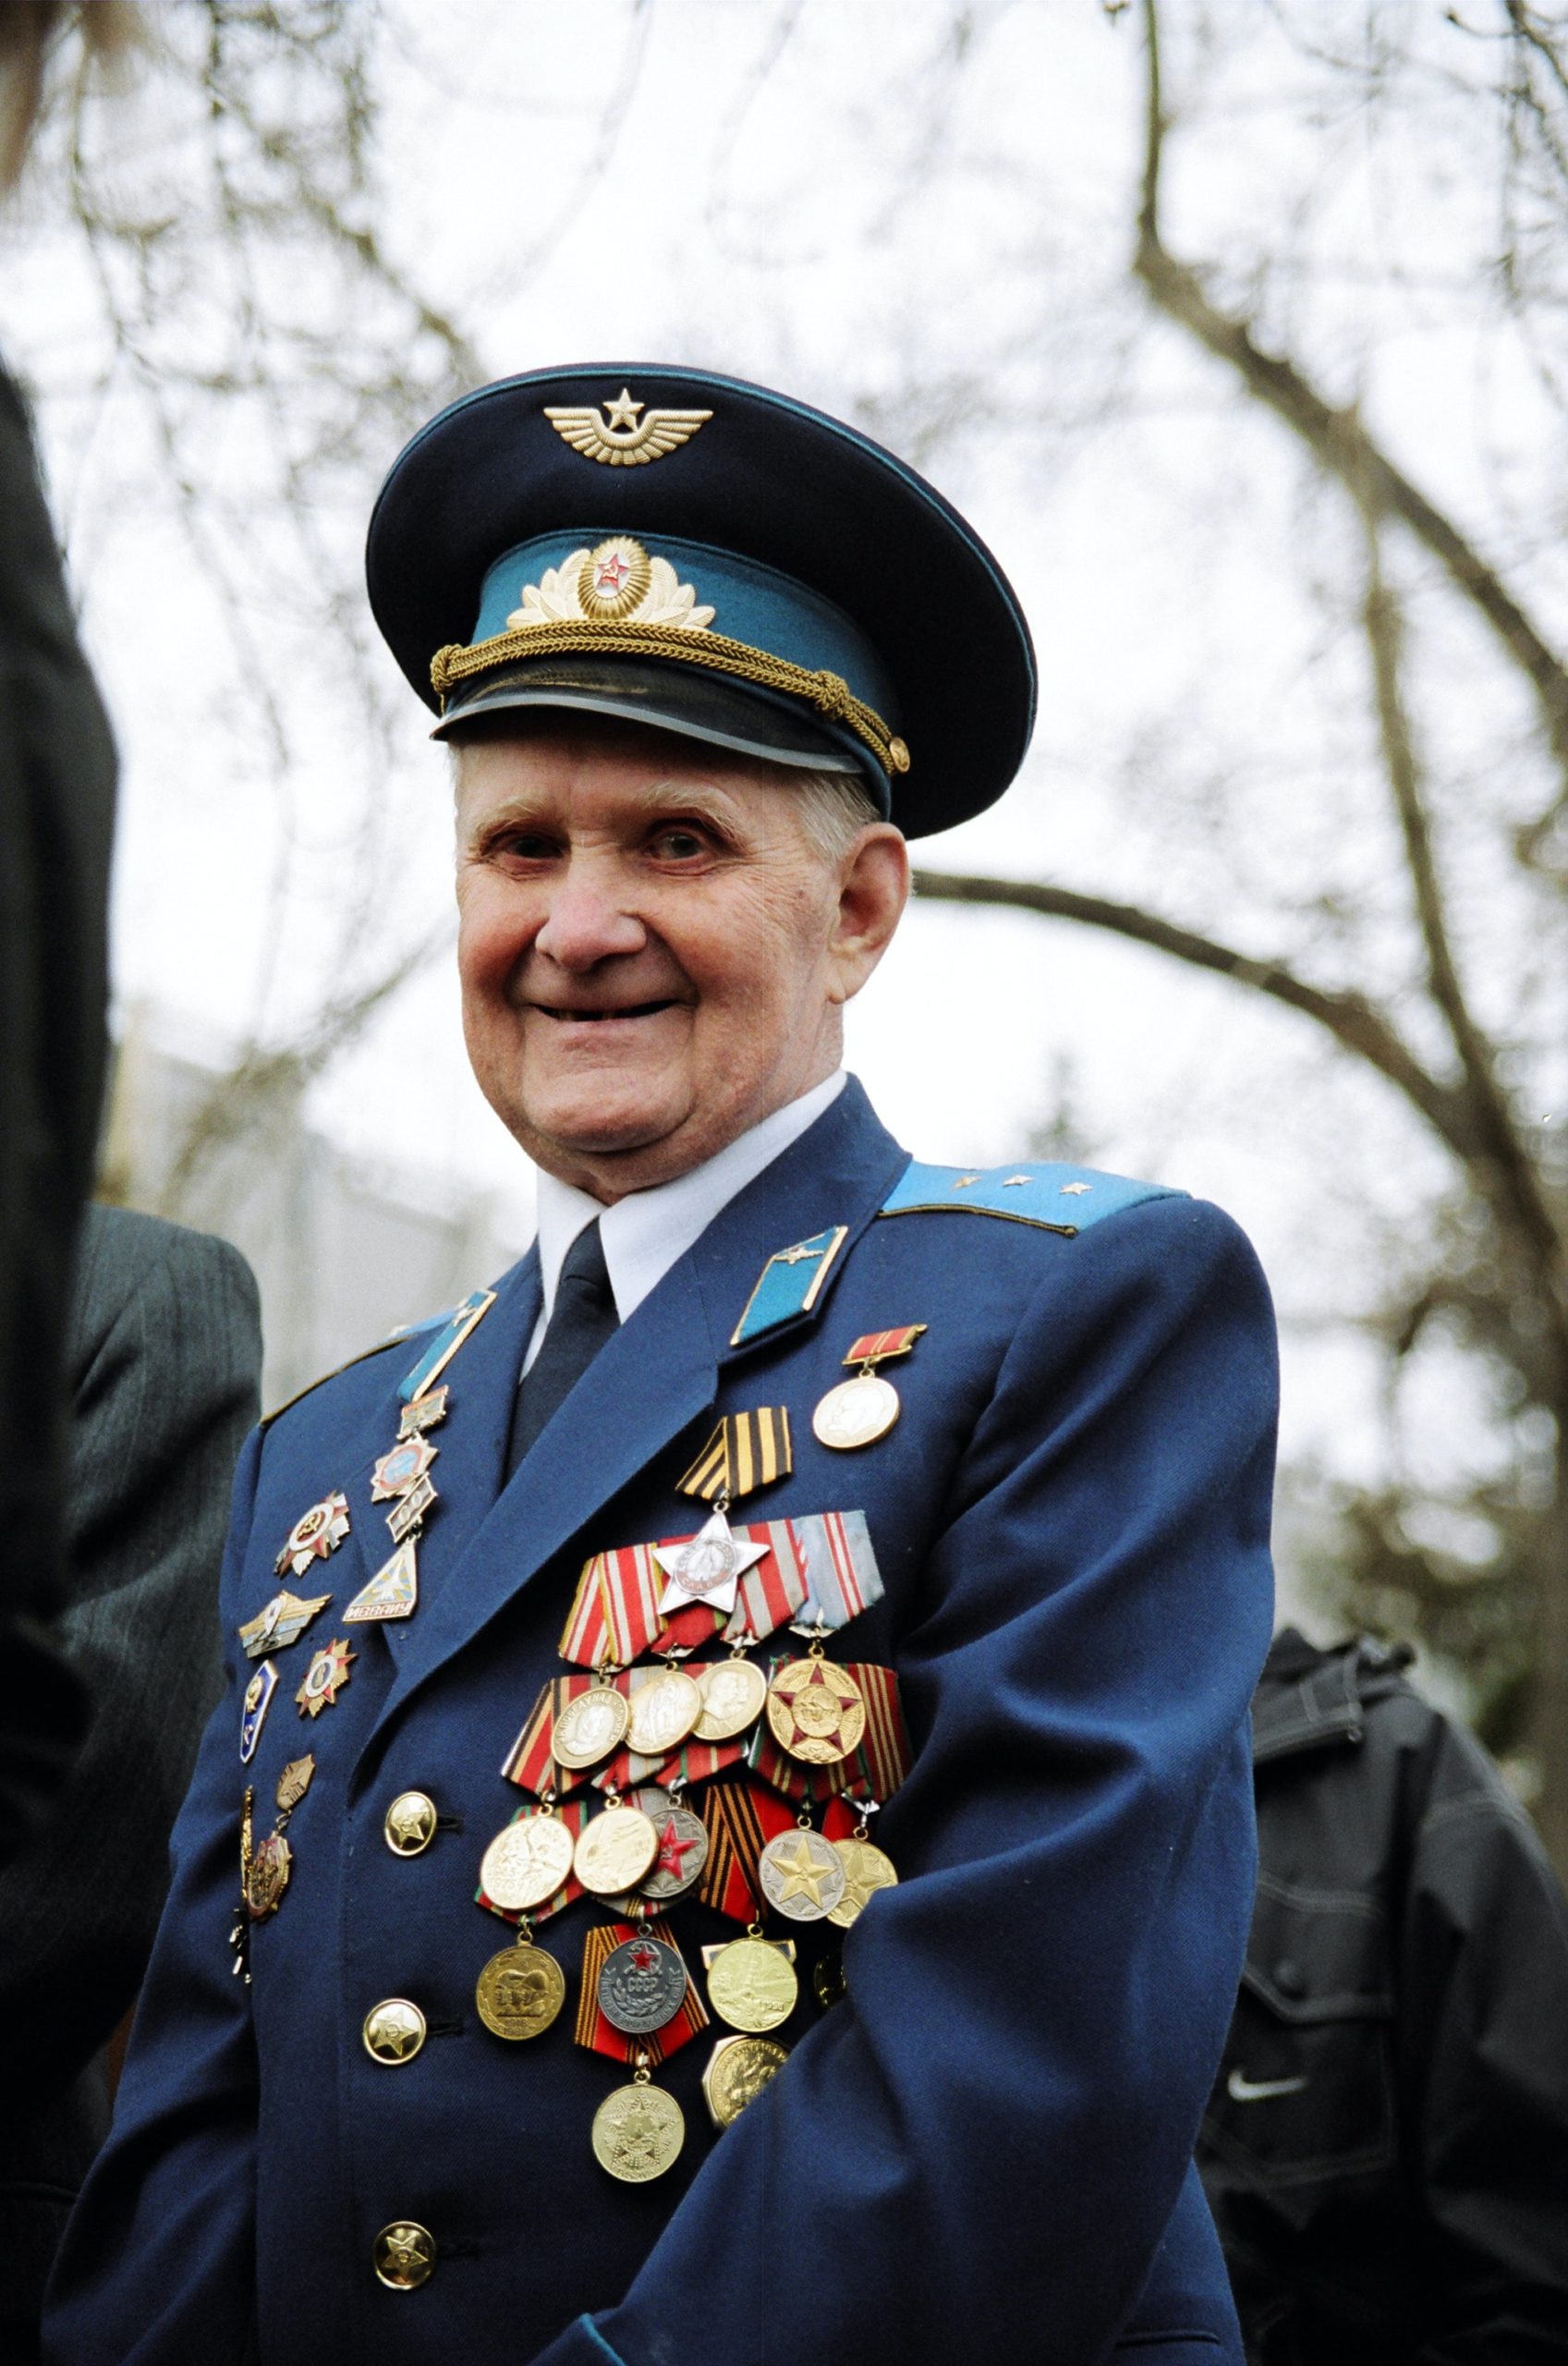 An older man in military uniform covered in medals smiles at the camera.